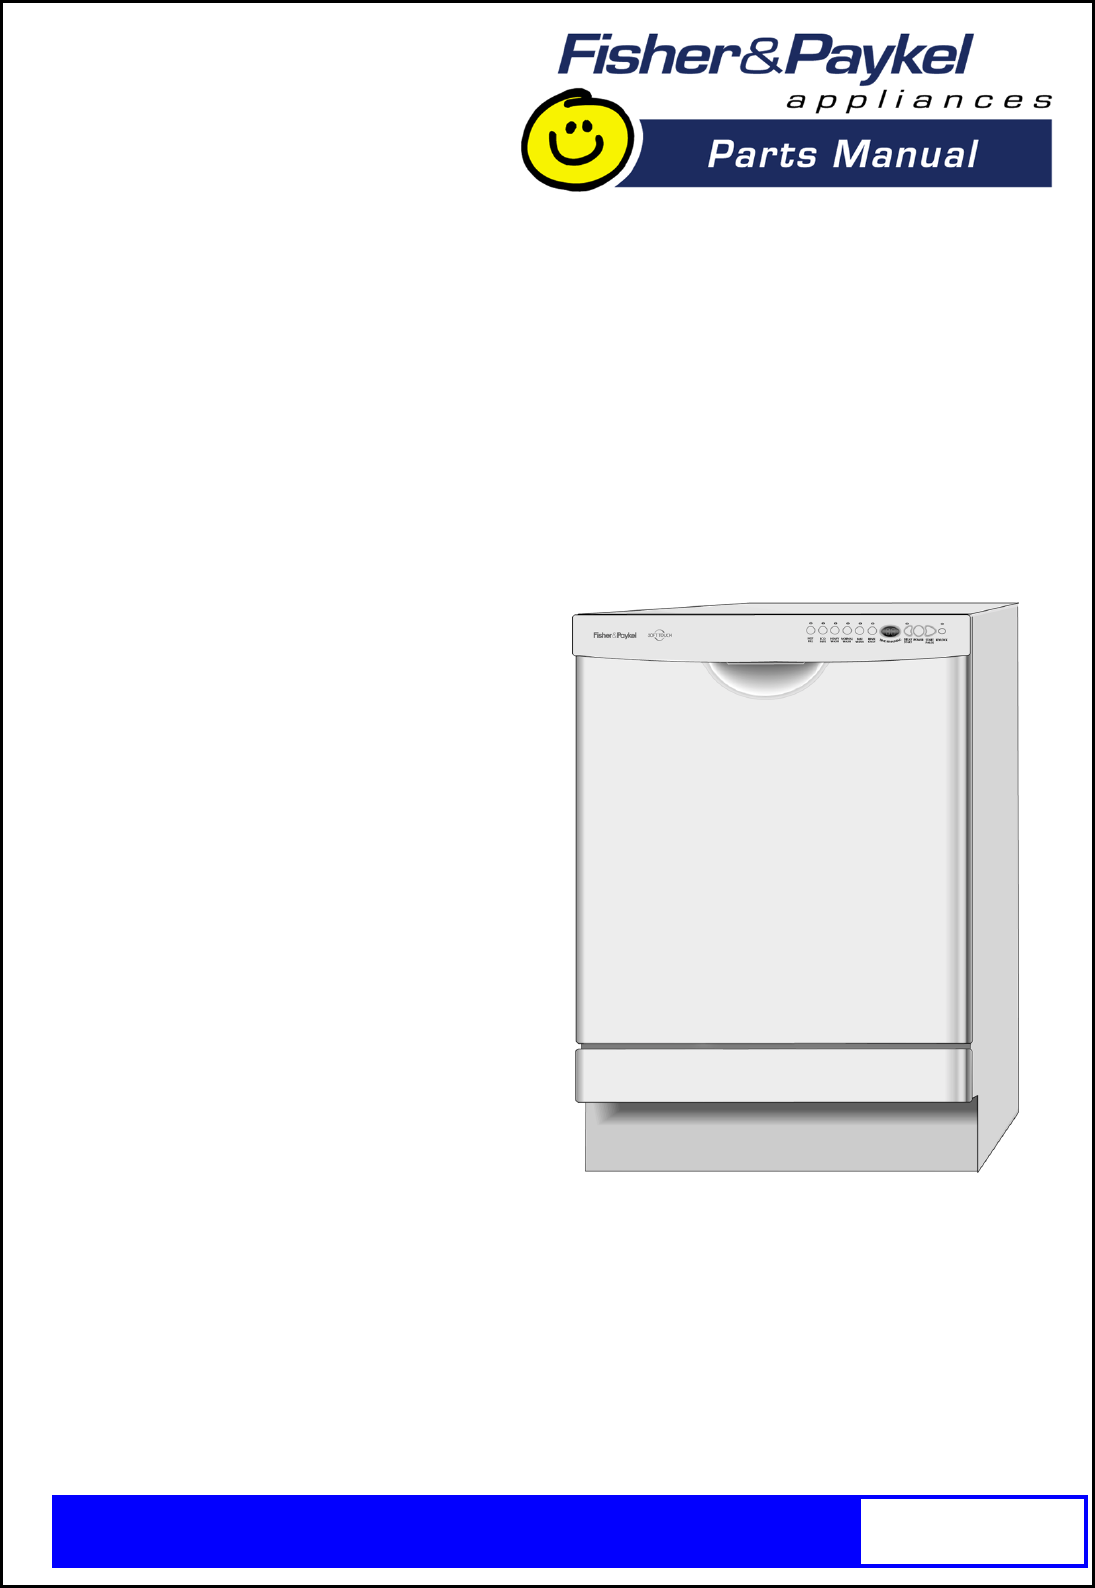 Fisher and paykel washer user guide